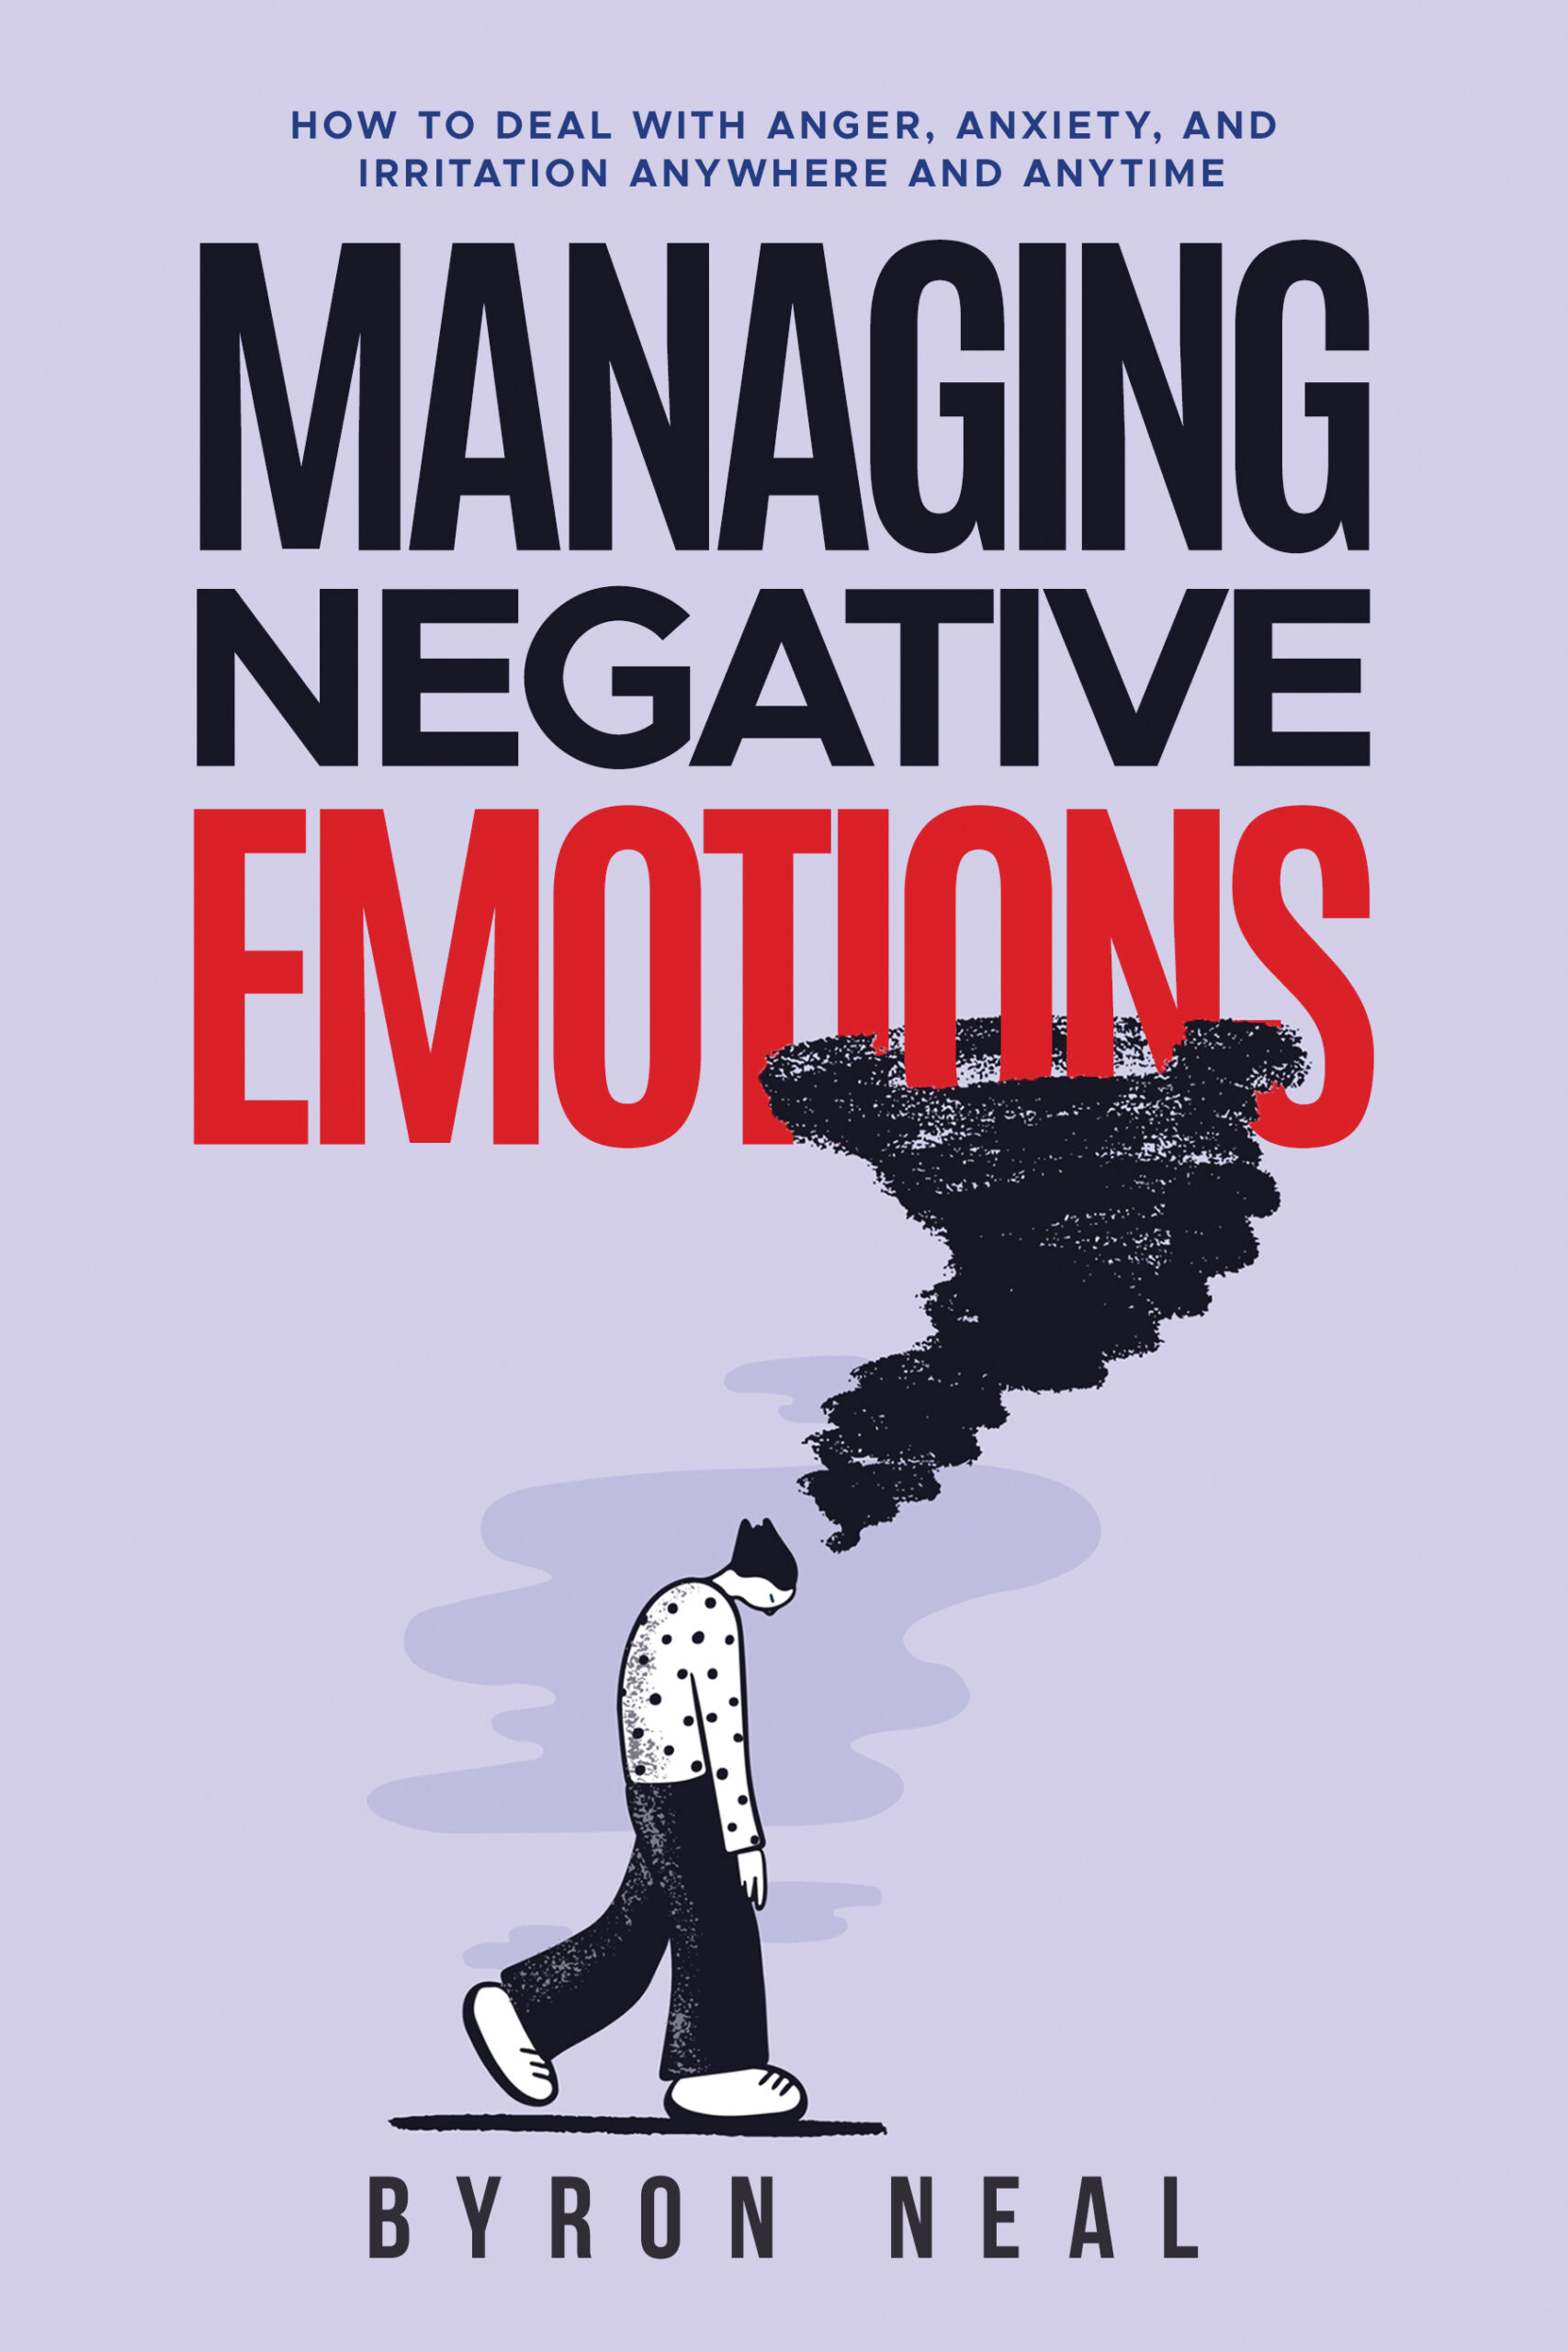 FREE: Managing Negative Emotions: How to deal with anger, anxiety, and irritation anywhere and anytime by Byron Neal